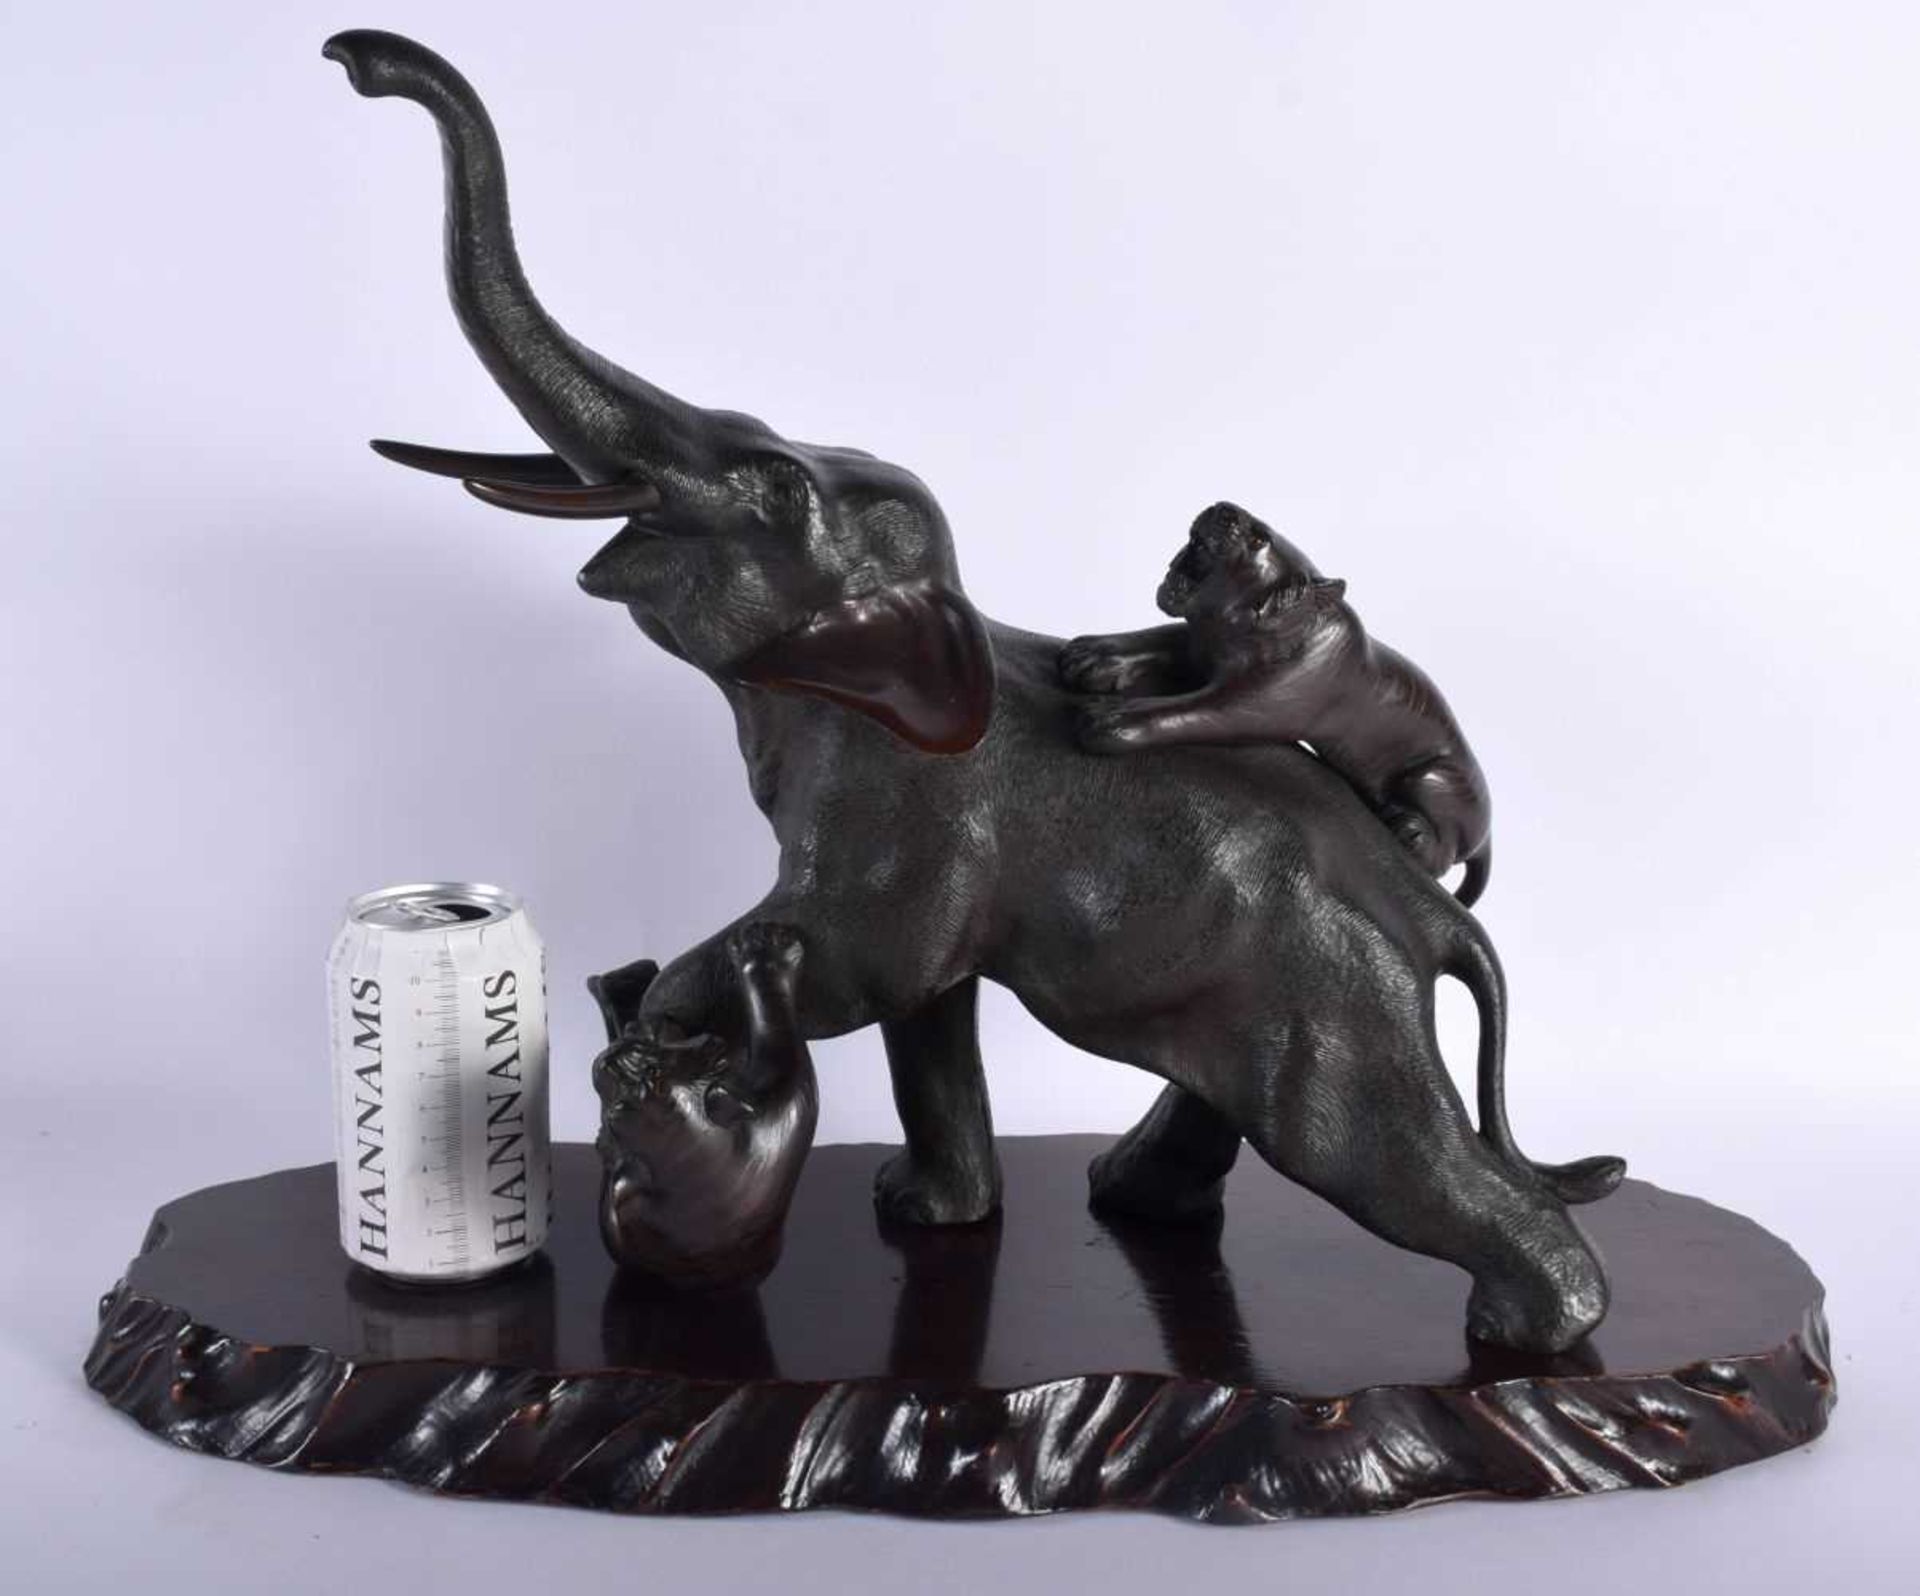 A LARGE 19TH CENTURY JAPANESE MEIJI PERIOD BRONZE OKIMONO modelled as an elephant and tiger upon a